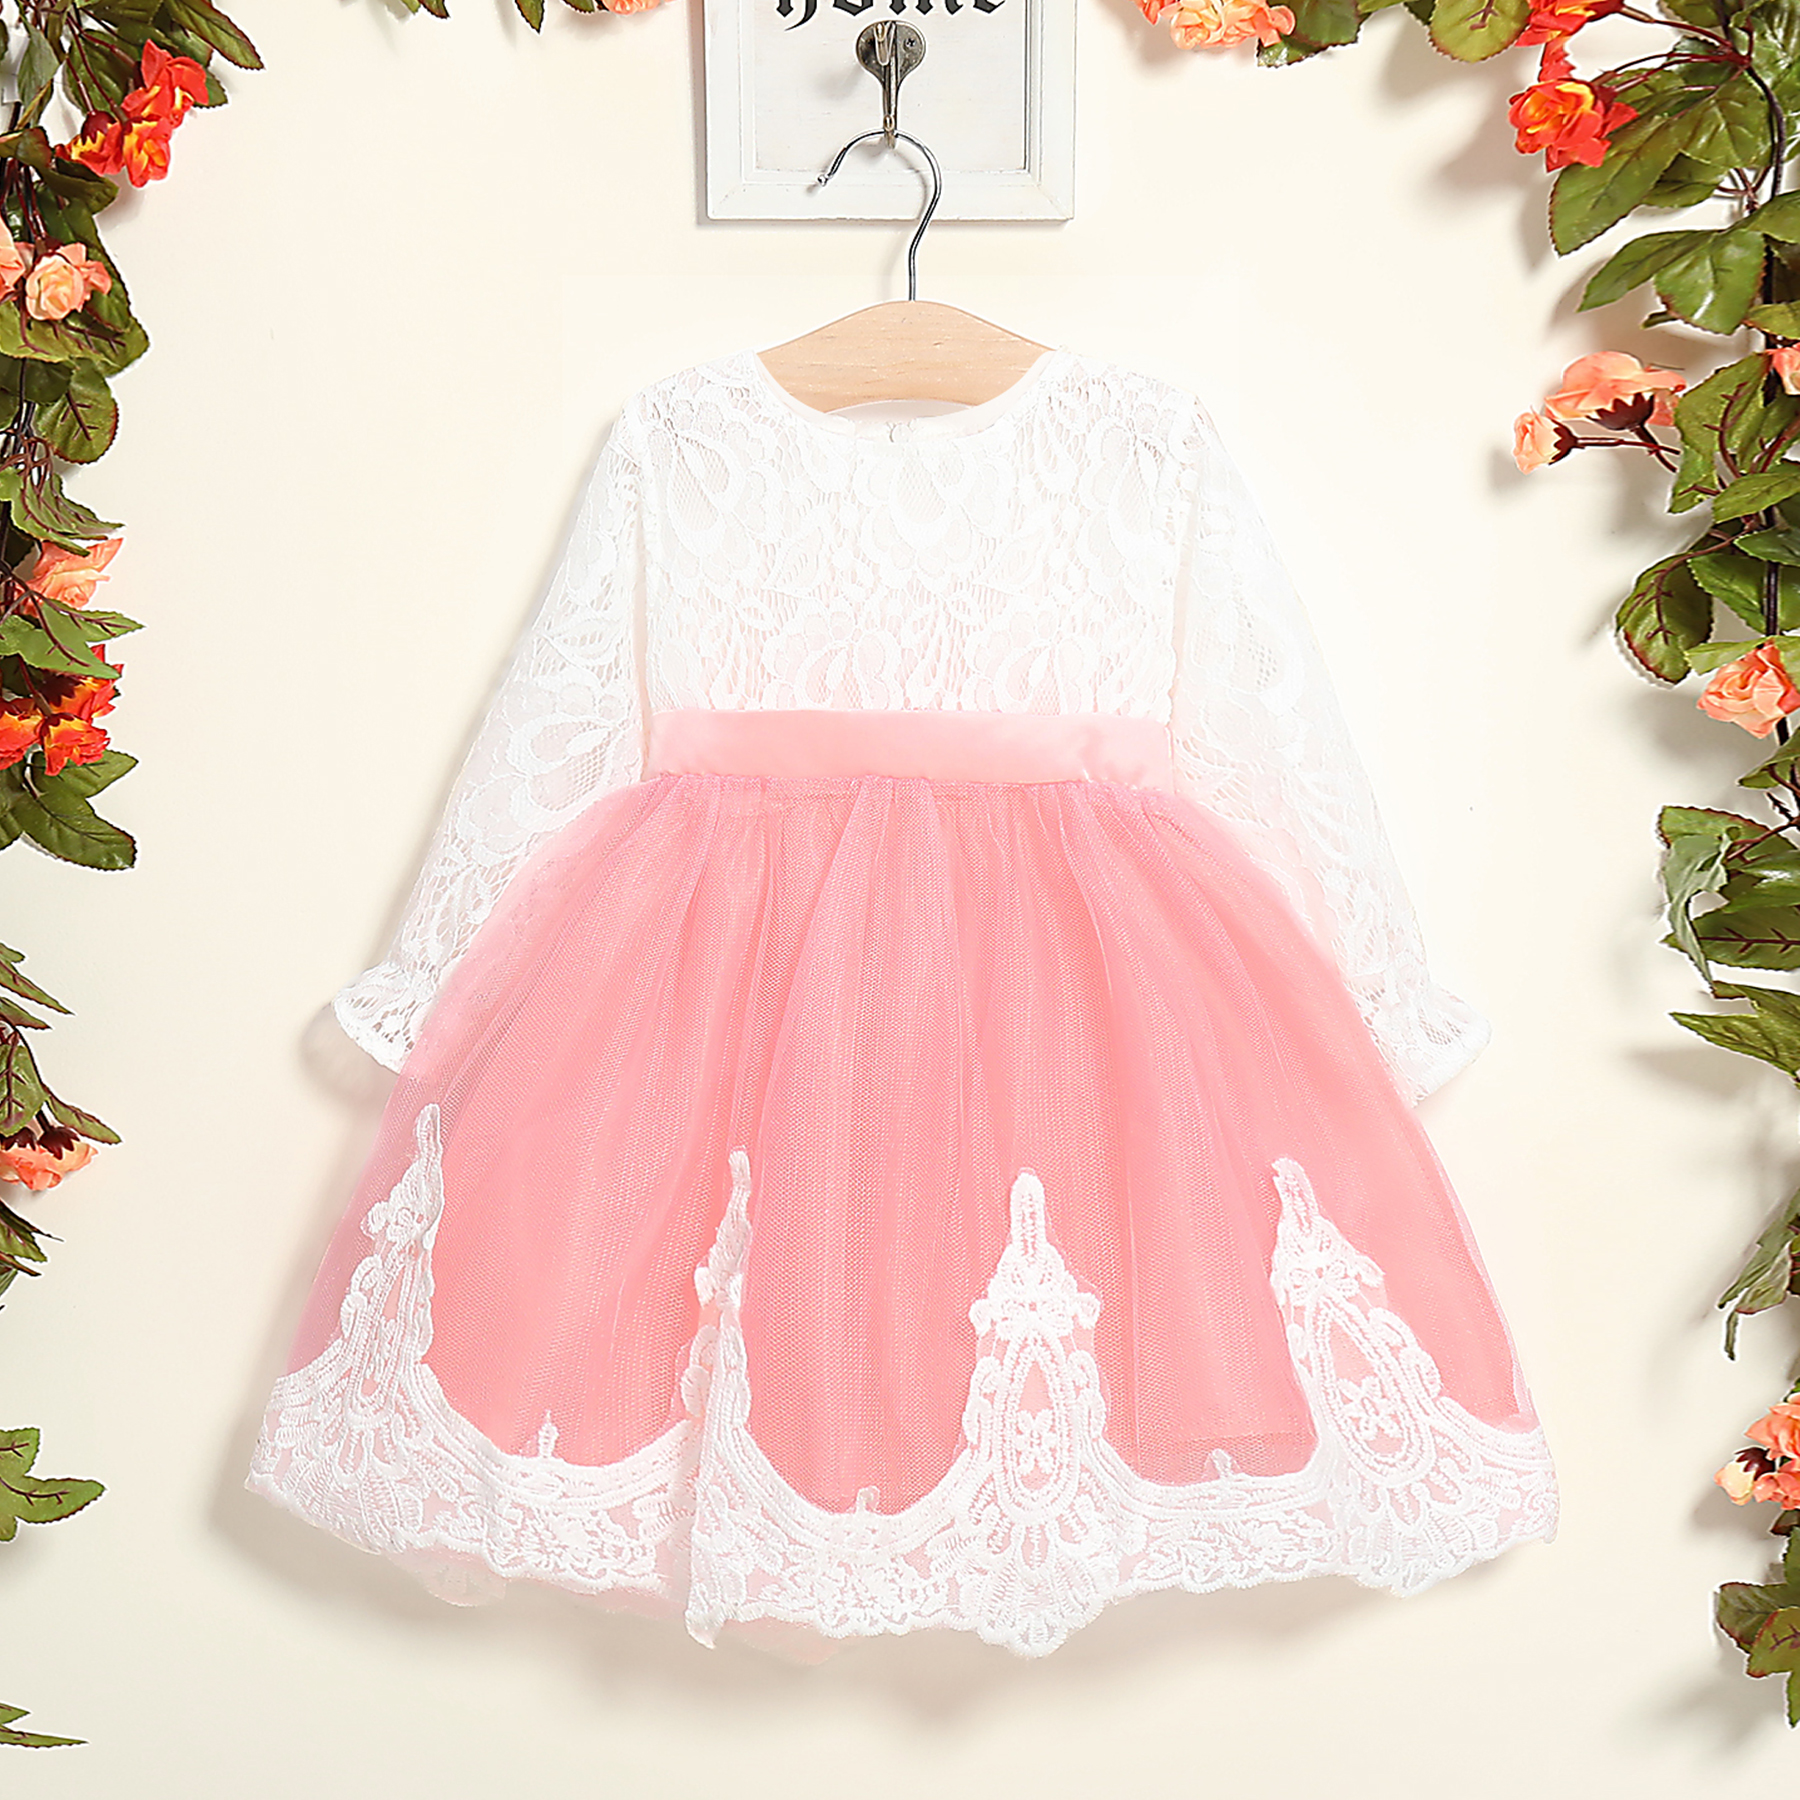 Lace-up and Tulle Splice Princess Dress for Baby Girl